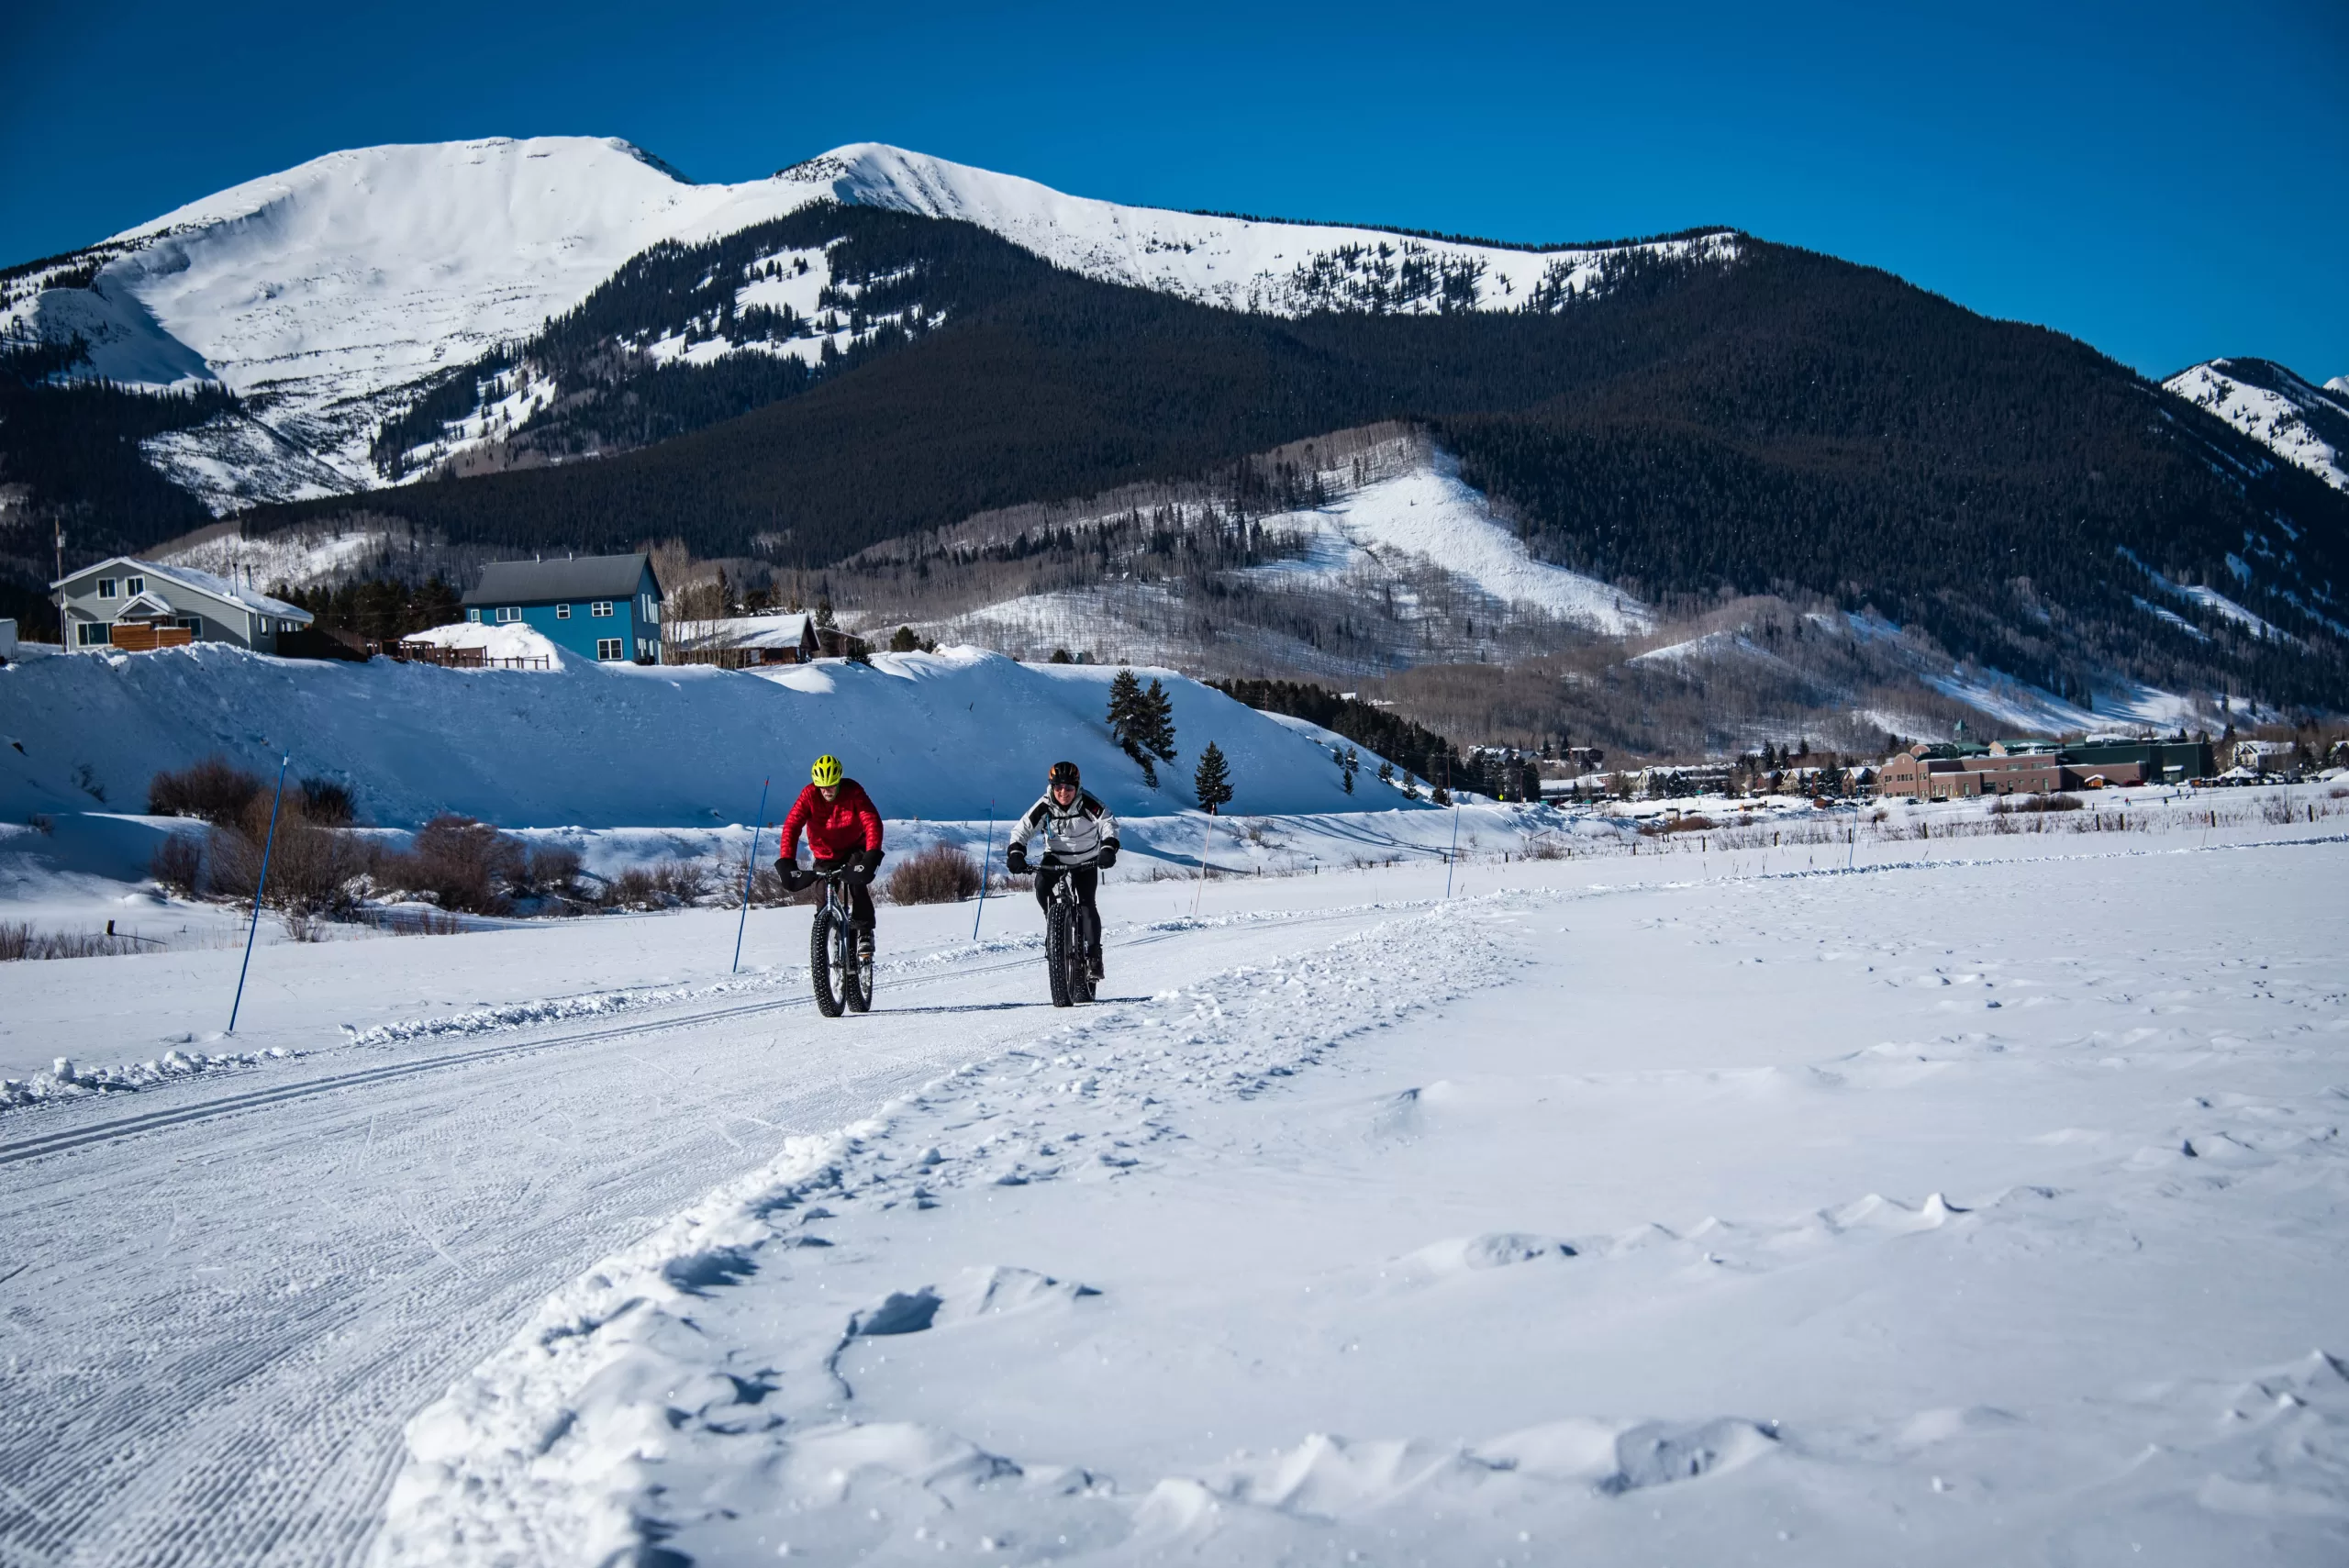 Two people ride fat bikes, which are special bikes designed for snow, on a groomed track. A mountain peak is in the background.